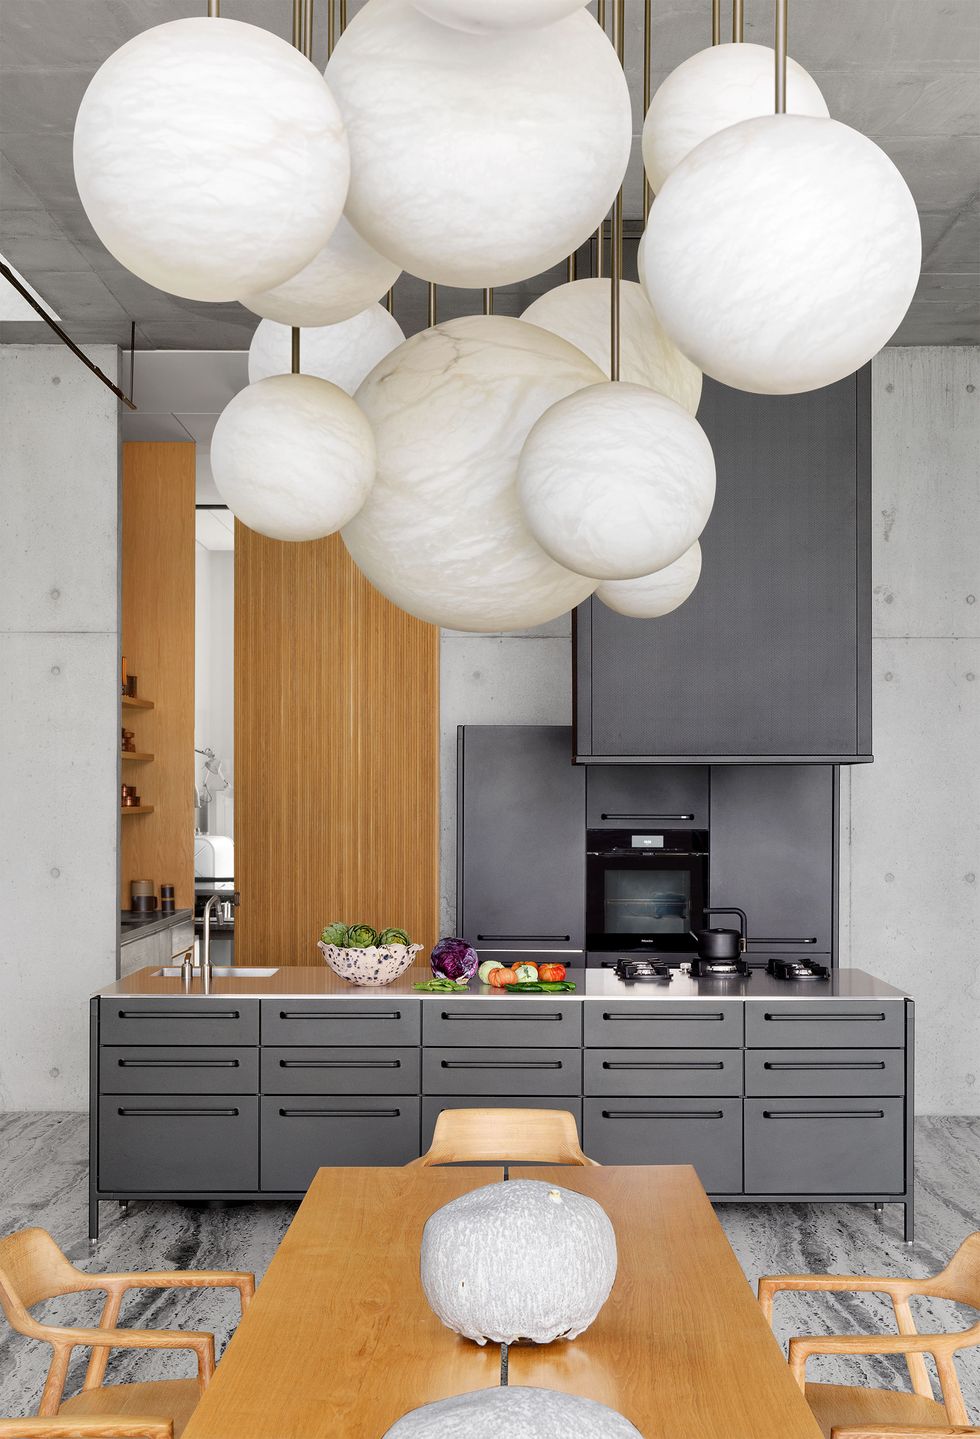 sleek gray kitchen at the end of a light wood dining table and chairs with a globular pendent chandelier above